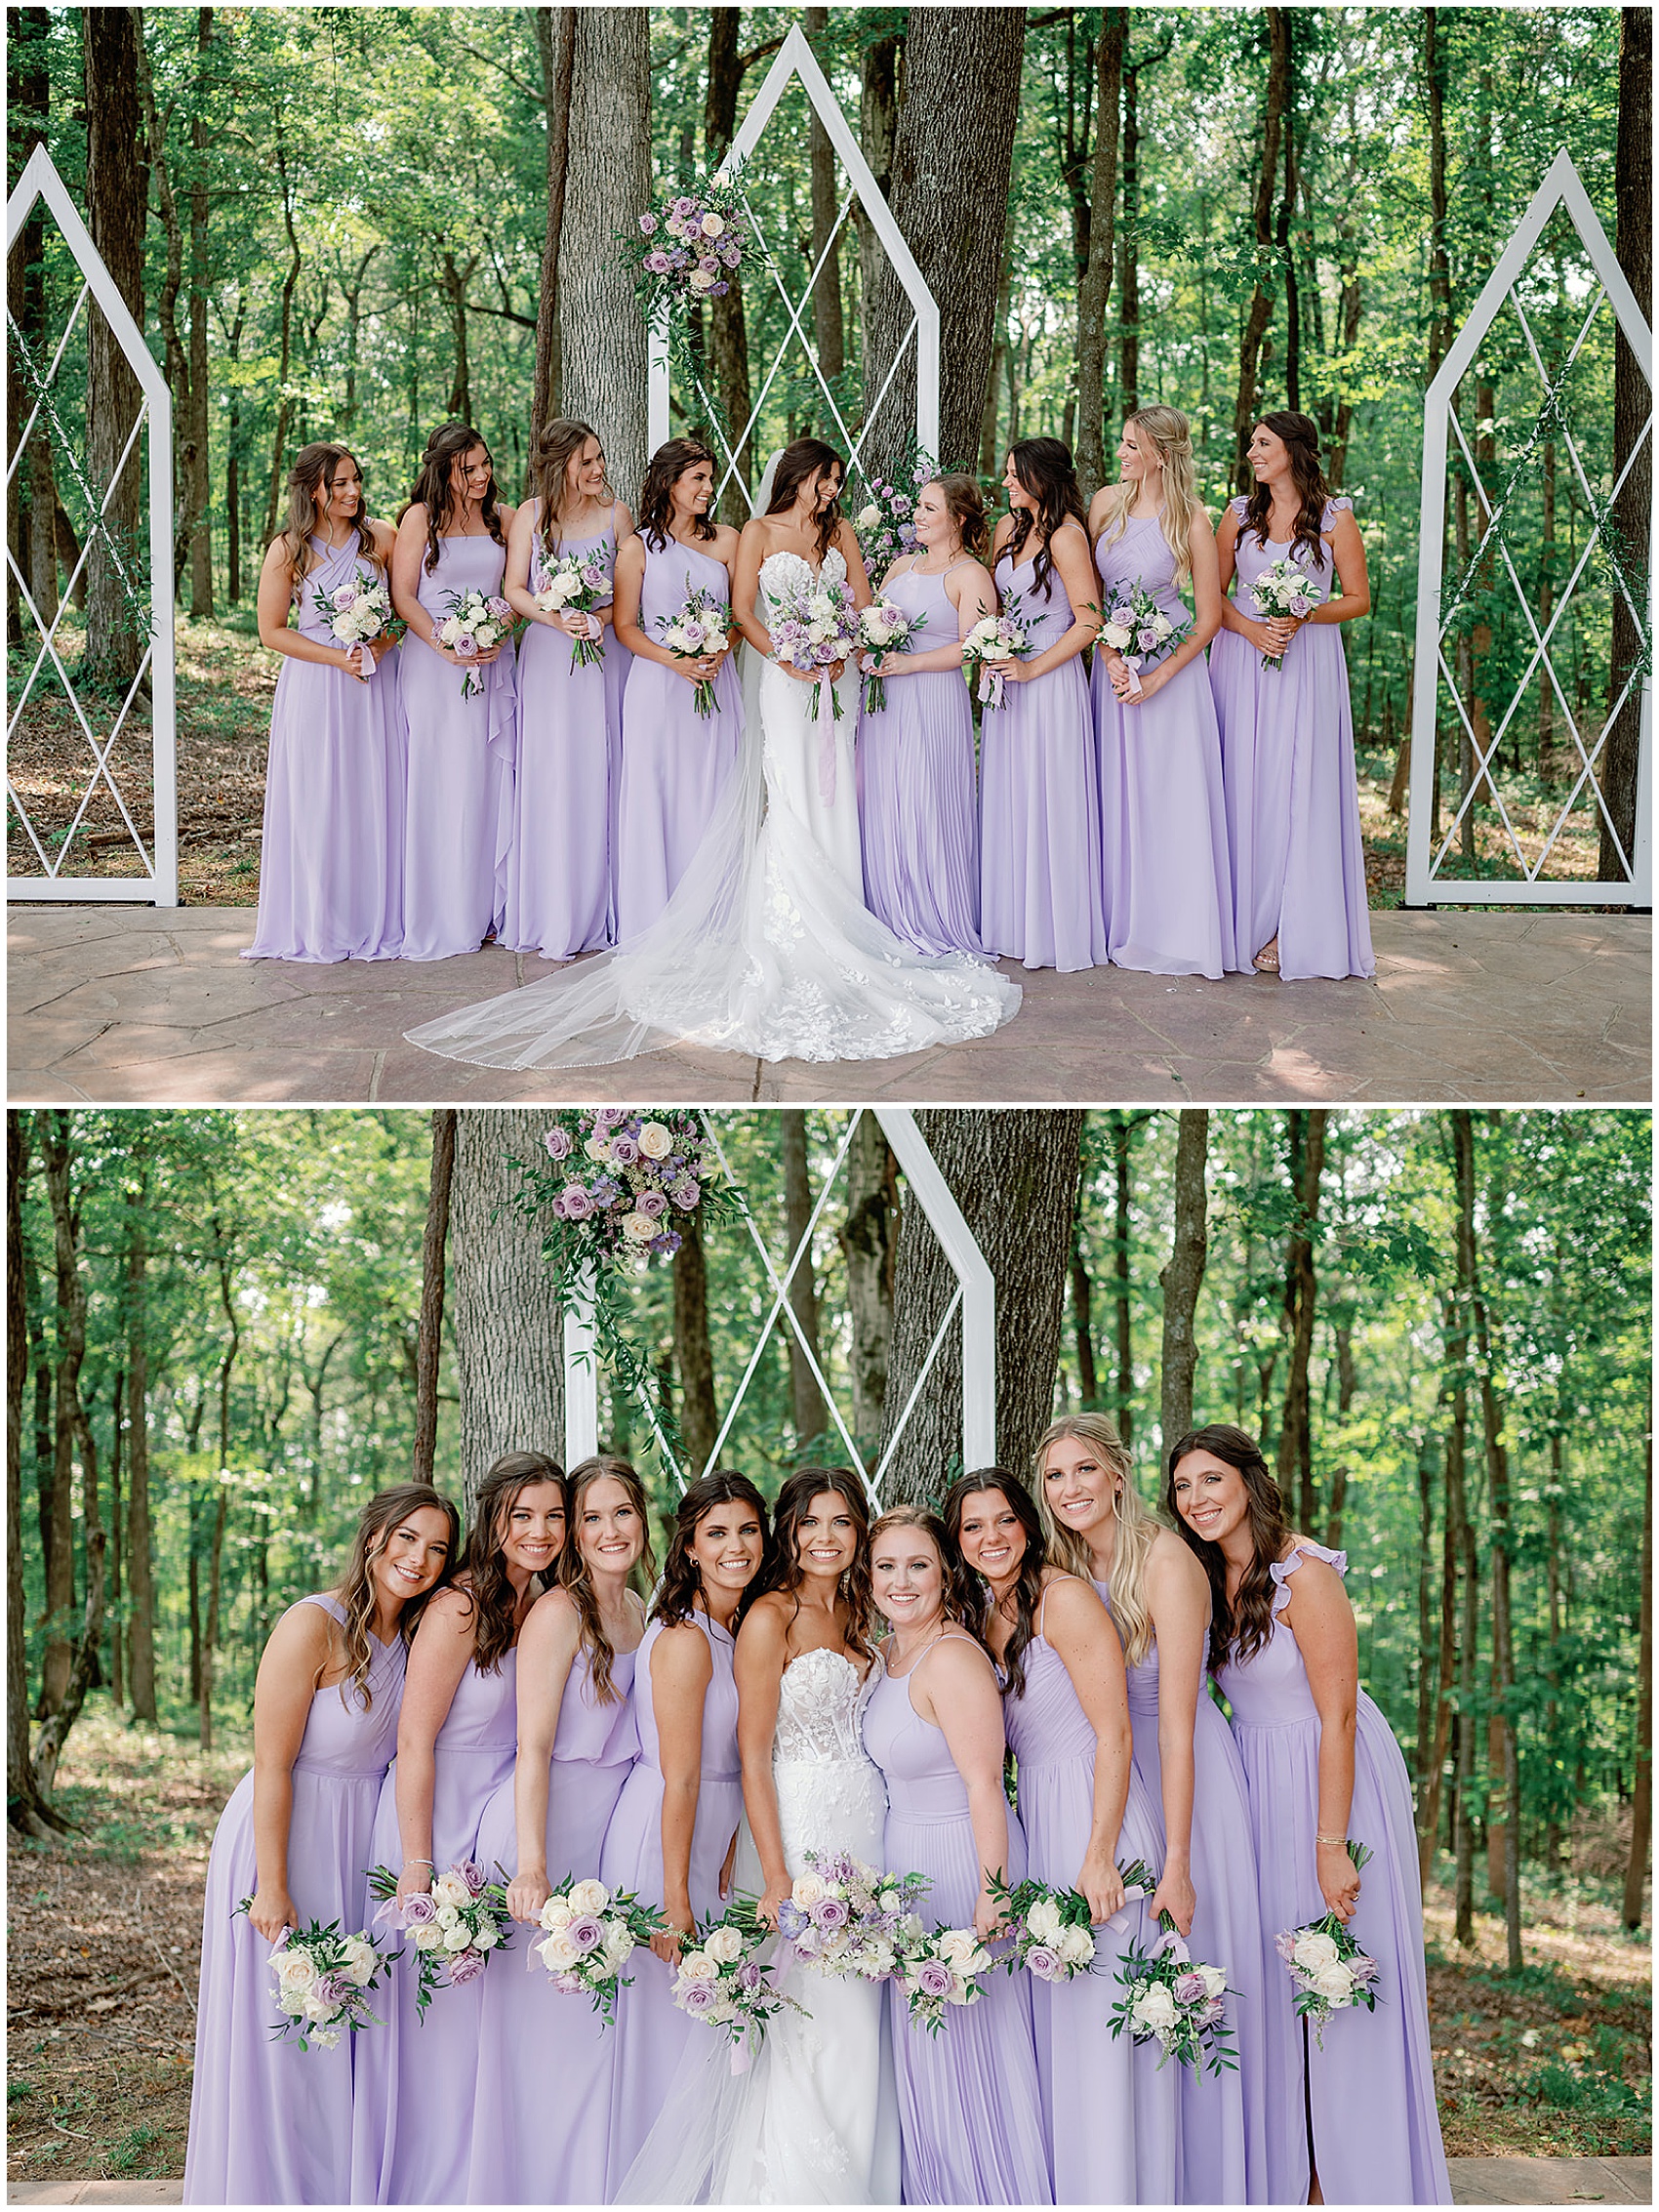 A bride stands surrounded by her bridesmaids in purple dresses all holding their bouquets